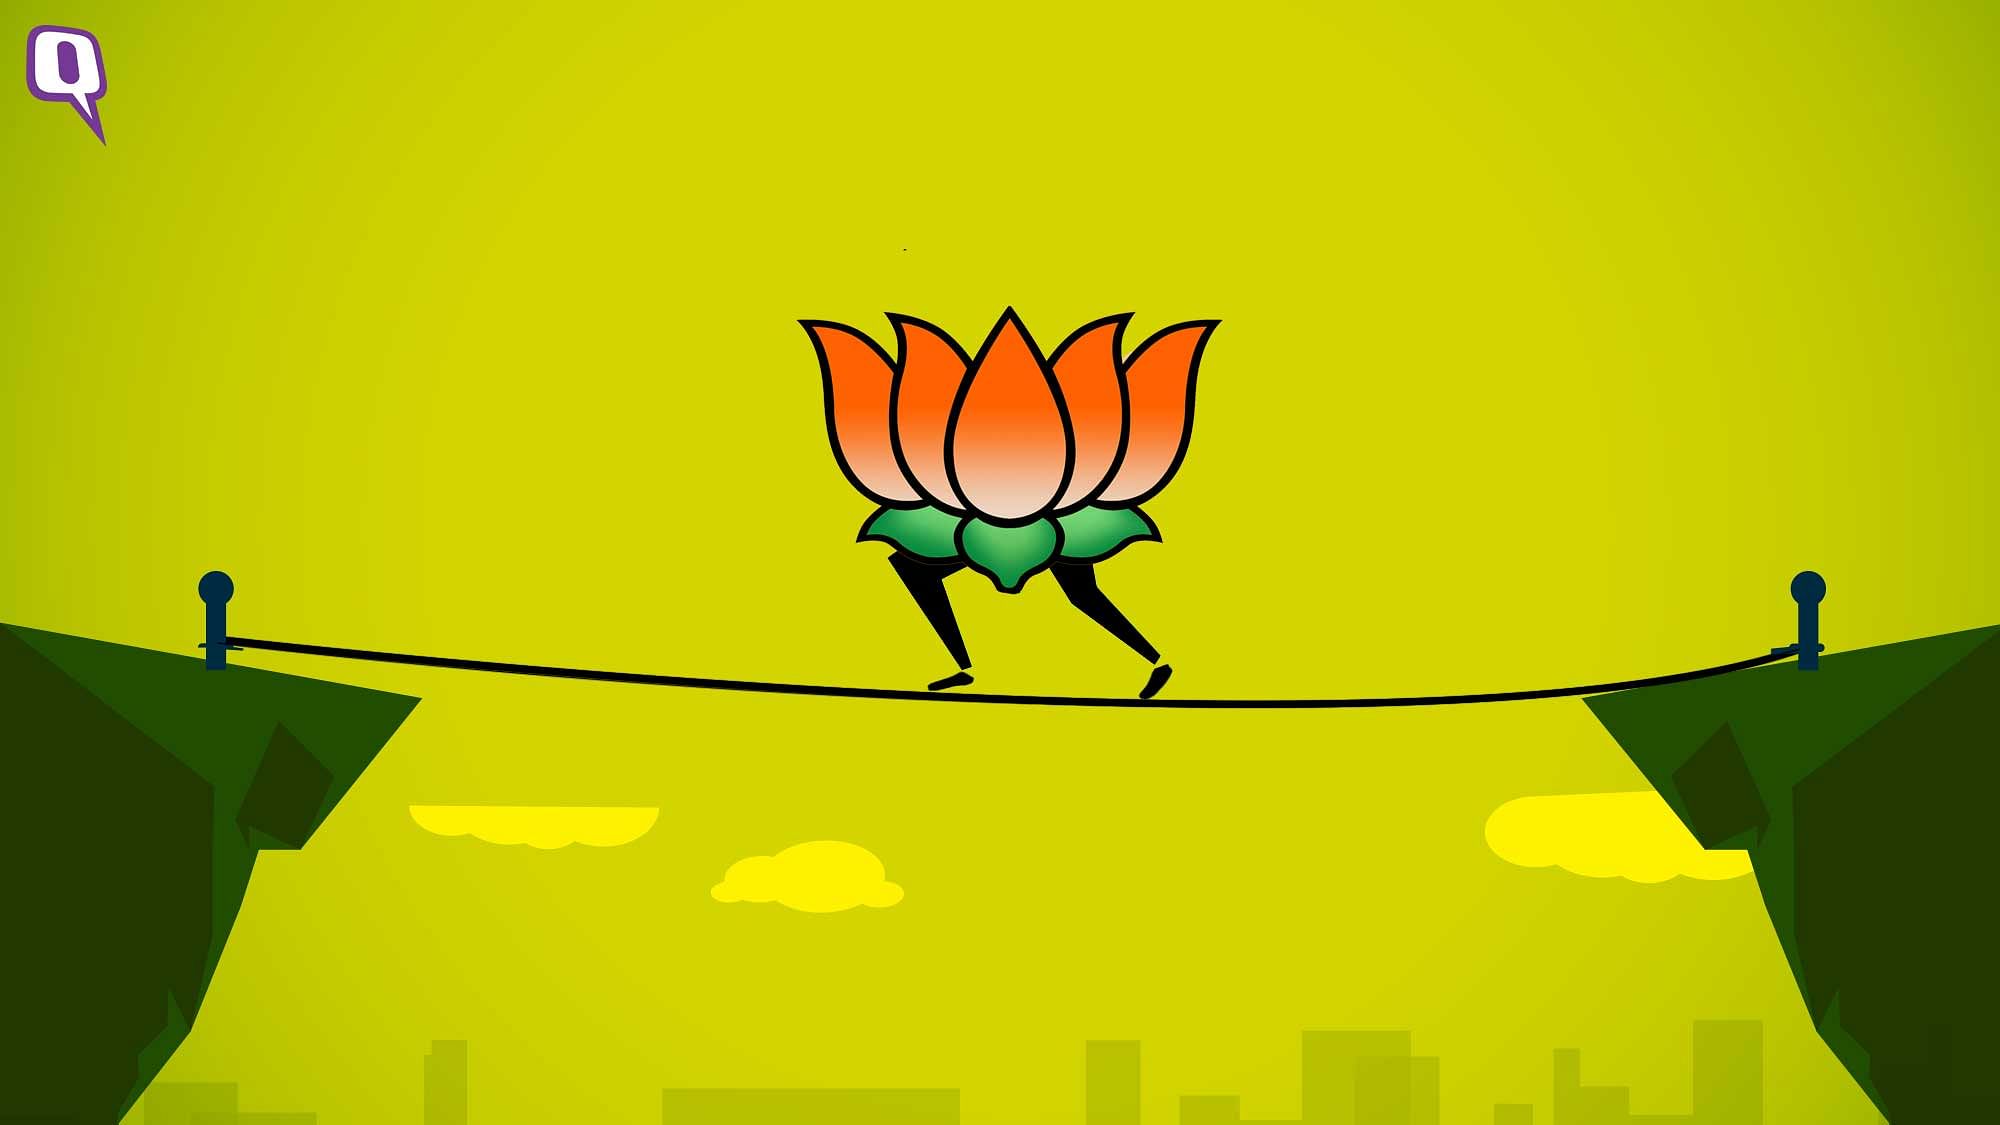 BJP heads towards a tough battle on its home turf in Gujarat, Adivasi and Dalit vote bank might rescue the party.&nbsp;